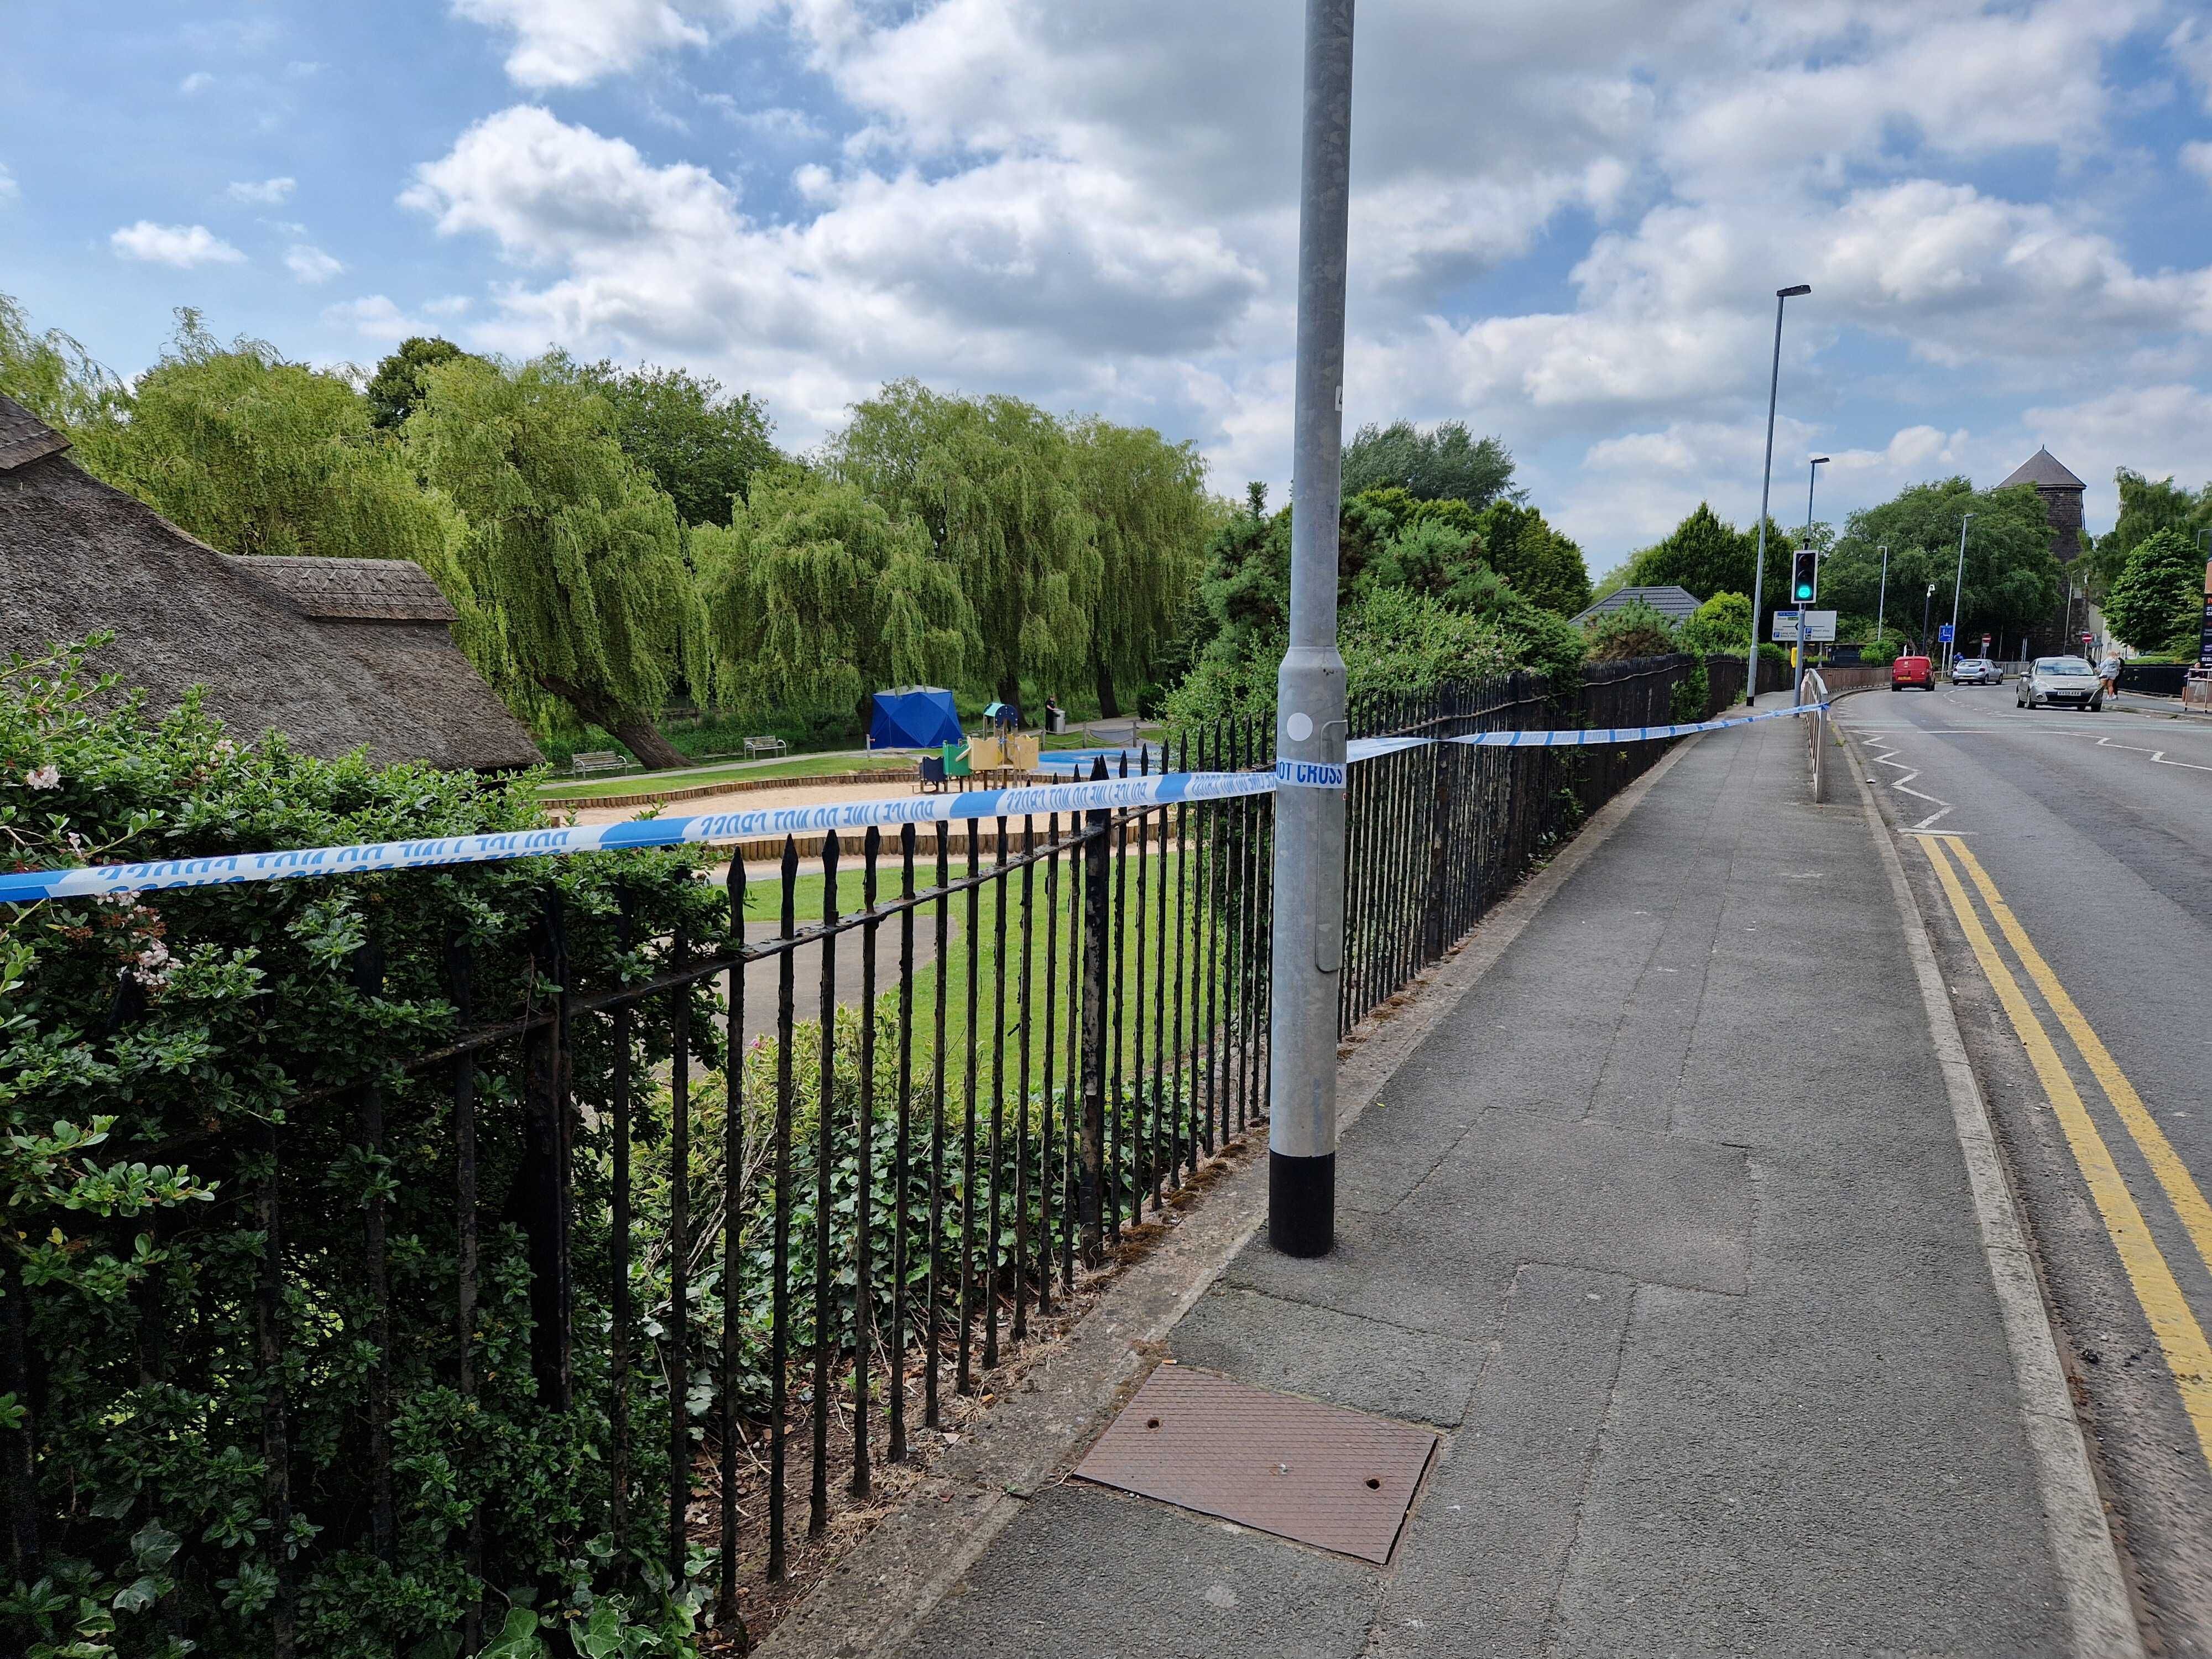 'It's horrible to think about': Shock after man's body recovered from river near children's park